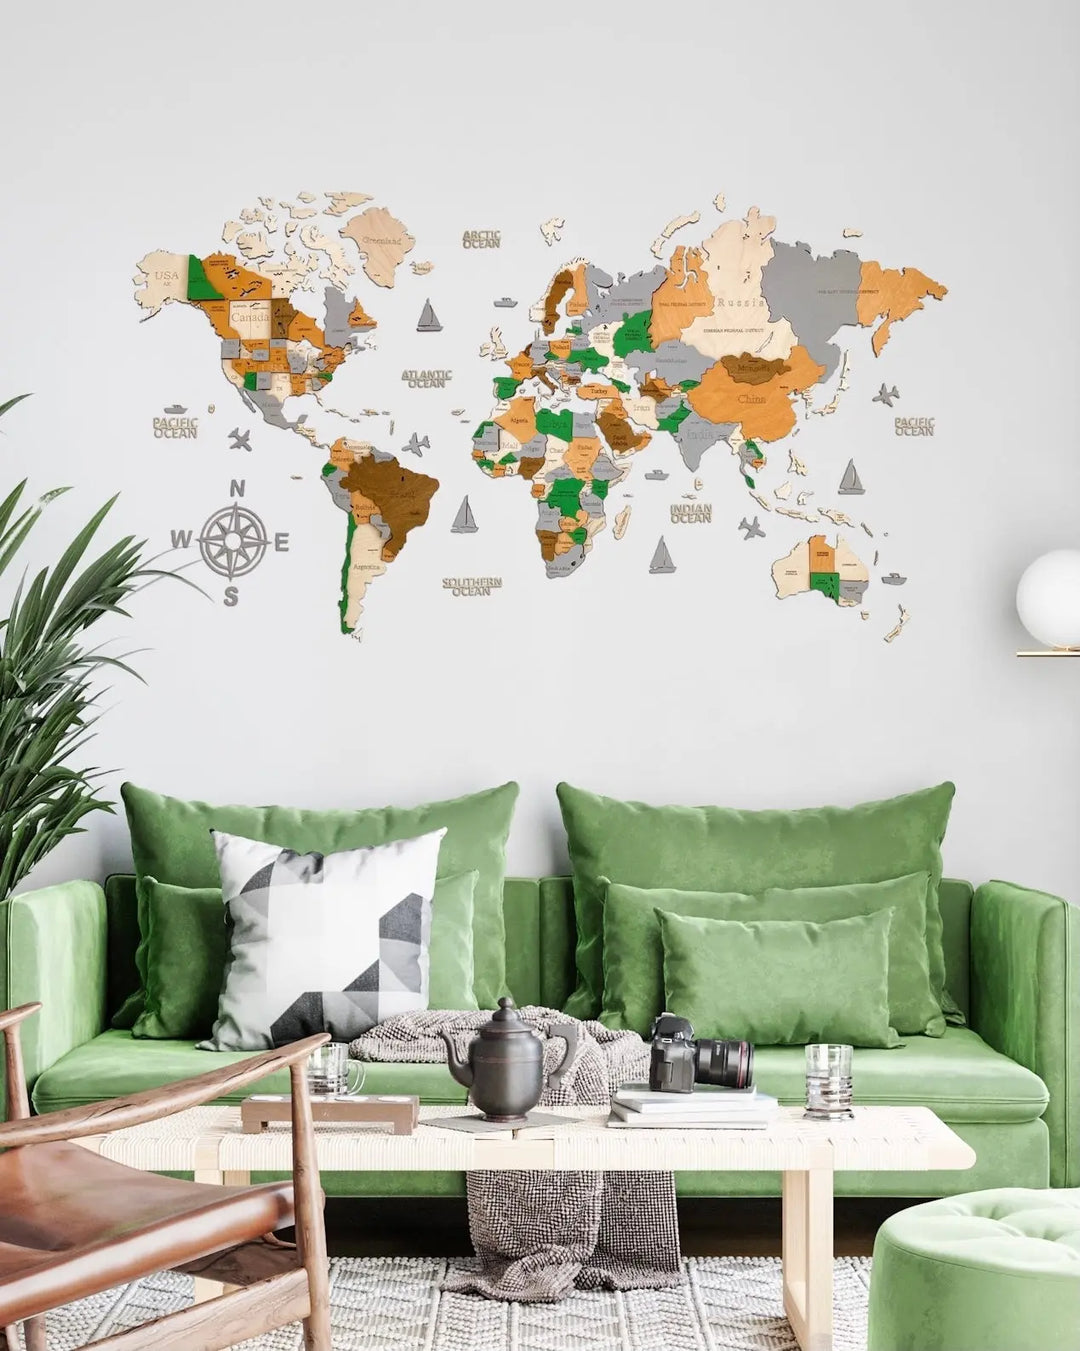 3D WOODEN WALL MAP COLOR “OASIS” - WoodLeo